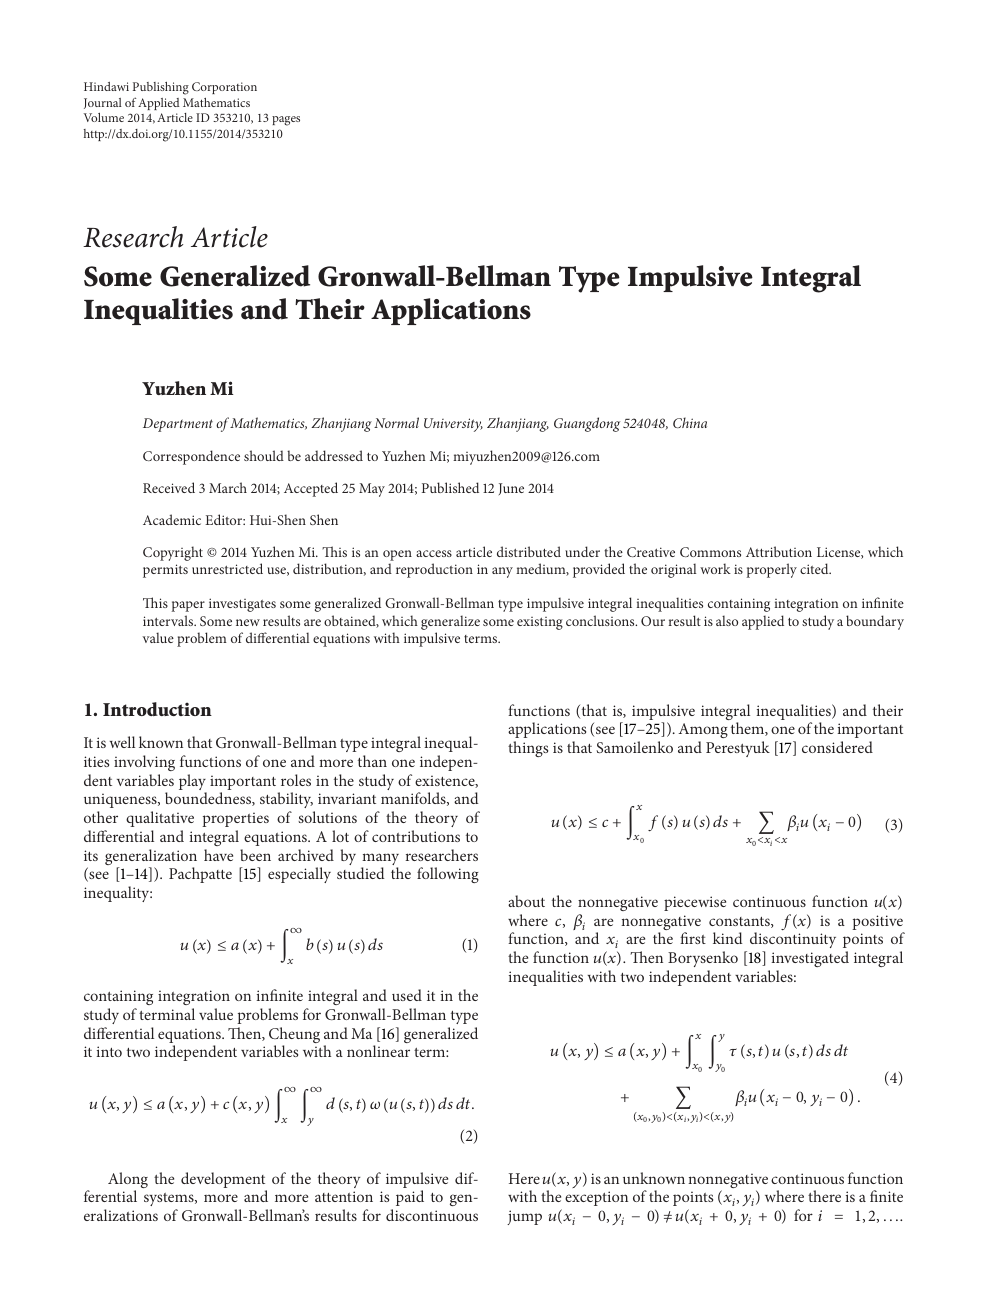 Some Generalized Gronwall Bellman Type Impulsive Integral Inequalities And Their Applications Topic Of Research Paper In Mathematics Download Scholarly Article Pdf And Read For Free On Cyberleninka Open Science Hub